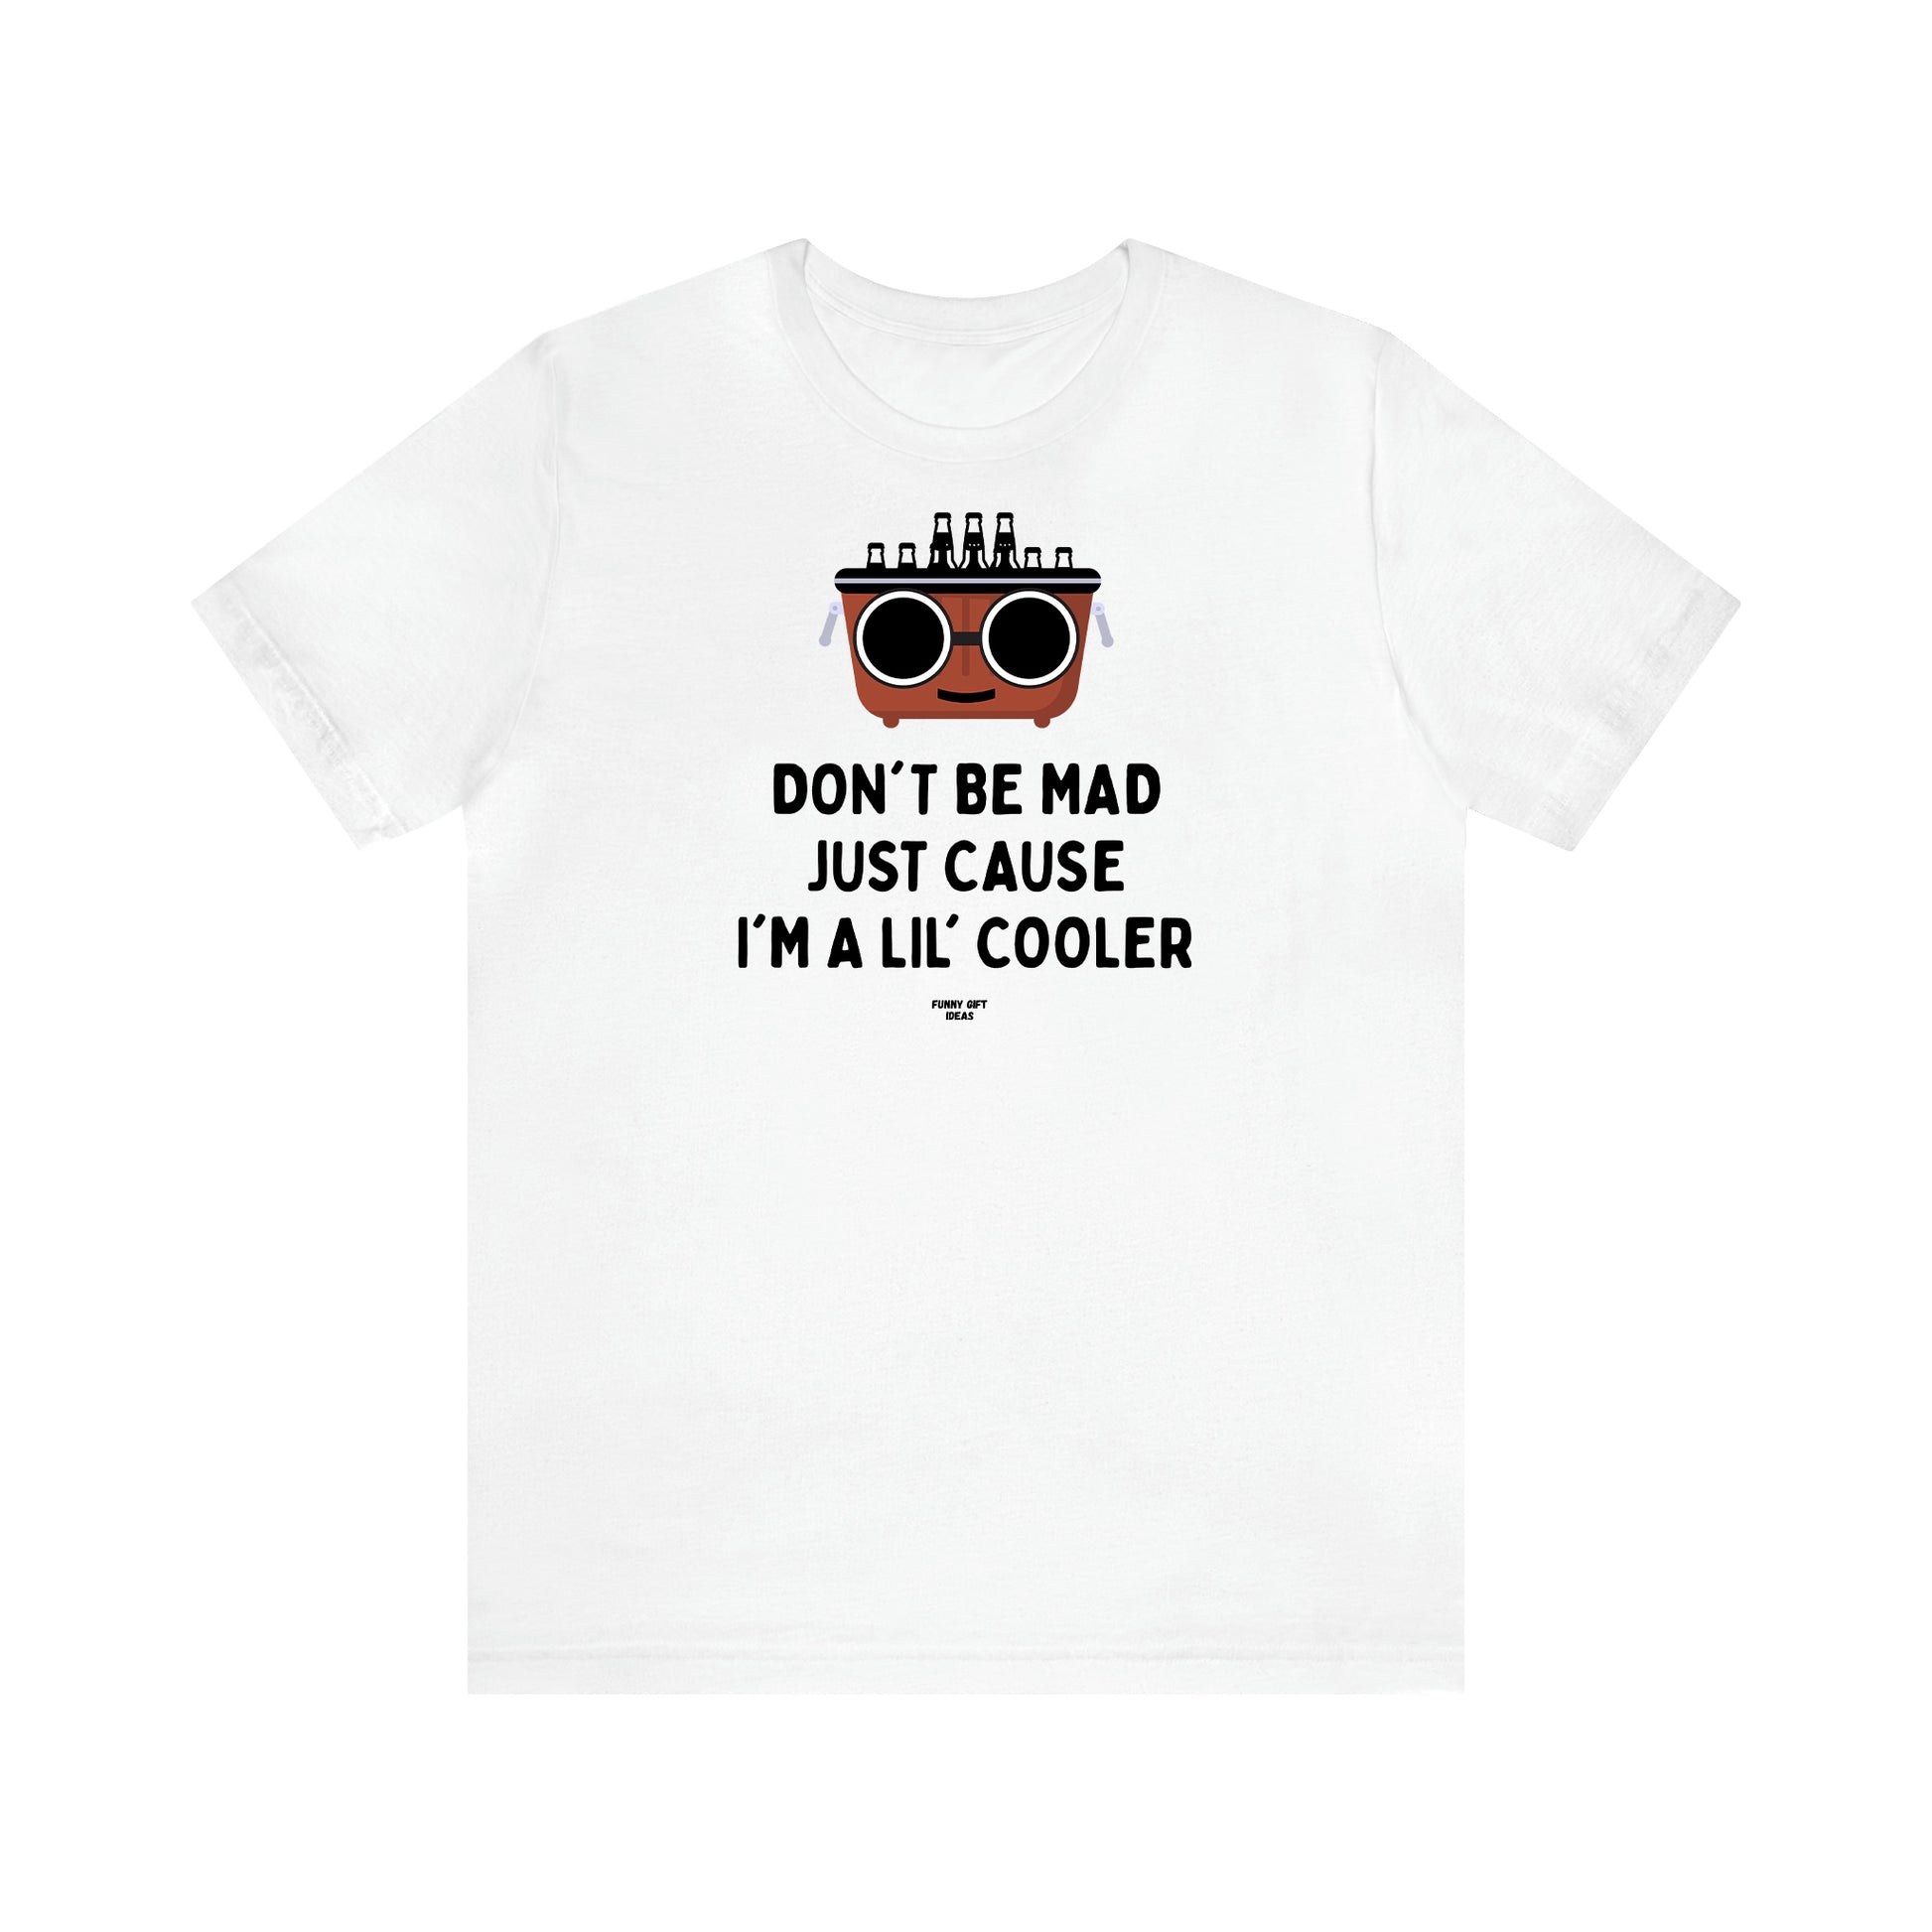 Men's T Shirts Don't Be Mad Just Cause I'm a Lil' Cooler - Funny Gift Ideas